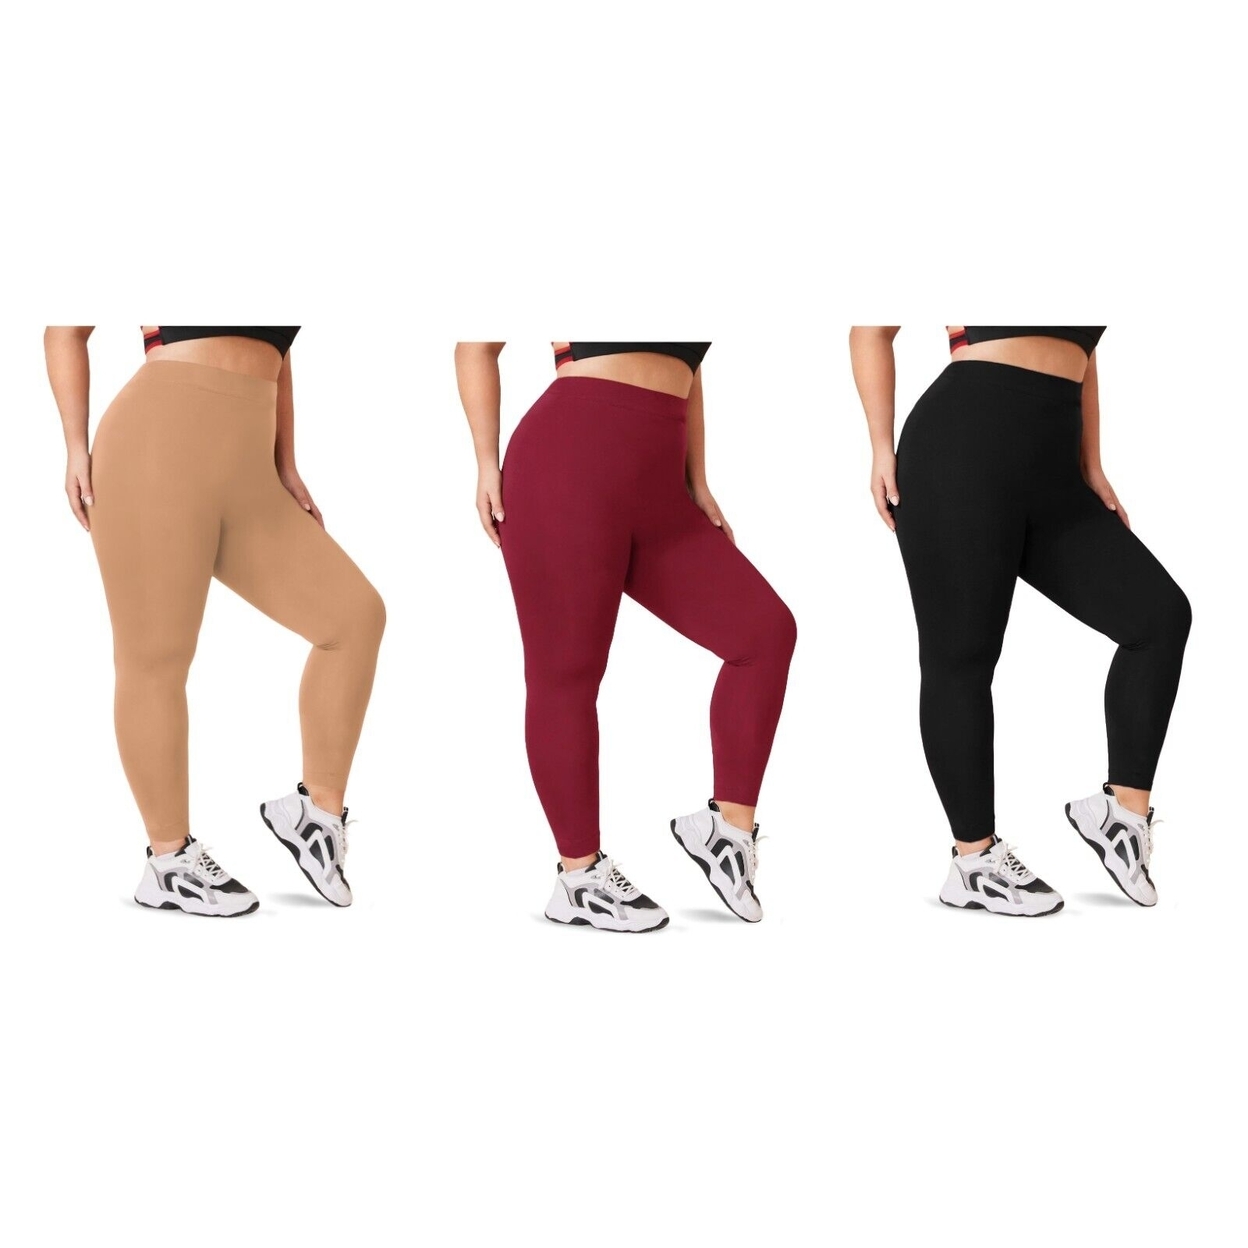 2-Pack: Women's Casual Ultra-Soft Smooth High Waisted Athletic Active Yoga Leggings Plus Size Available - Red & Red, 1x